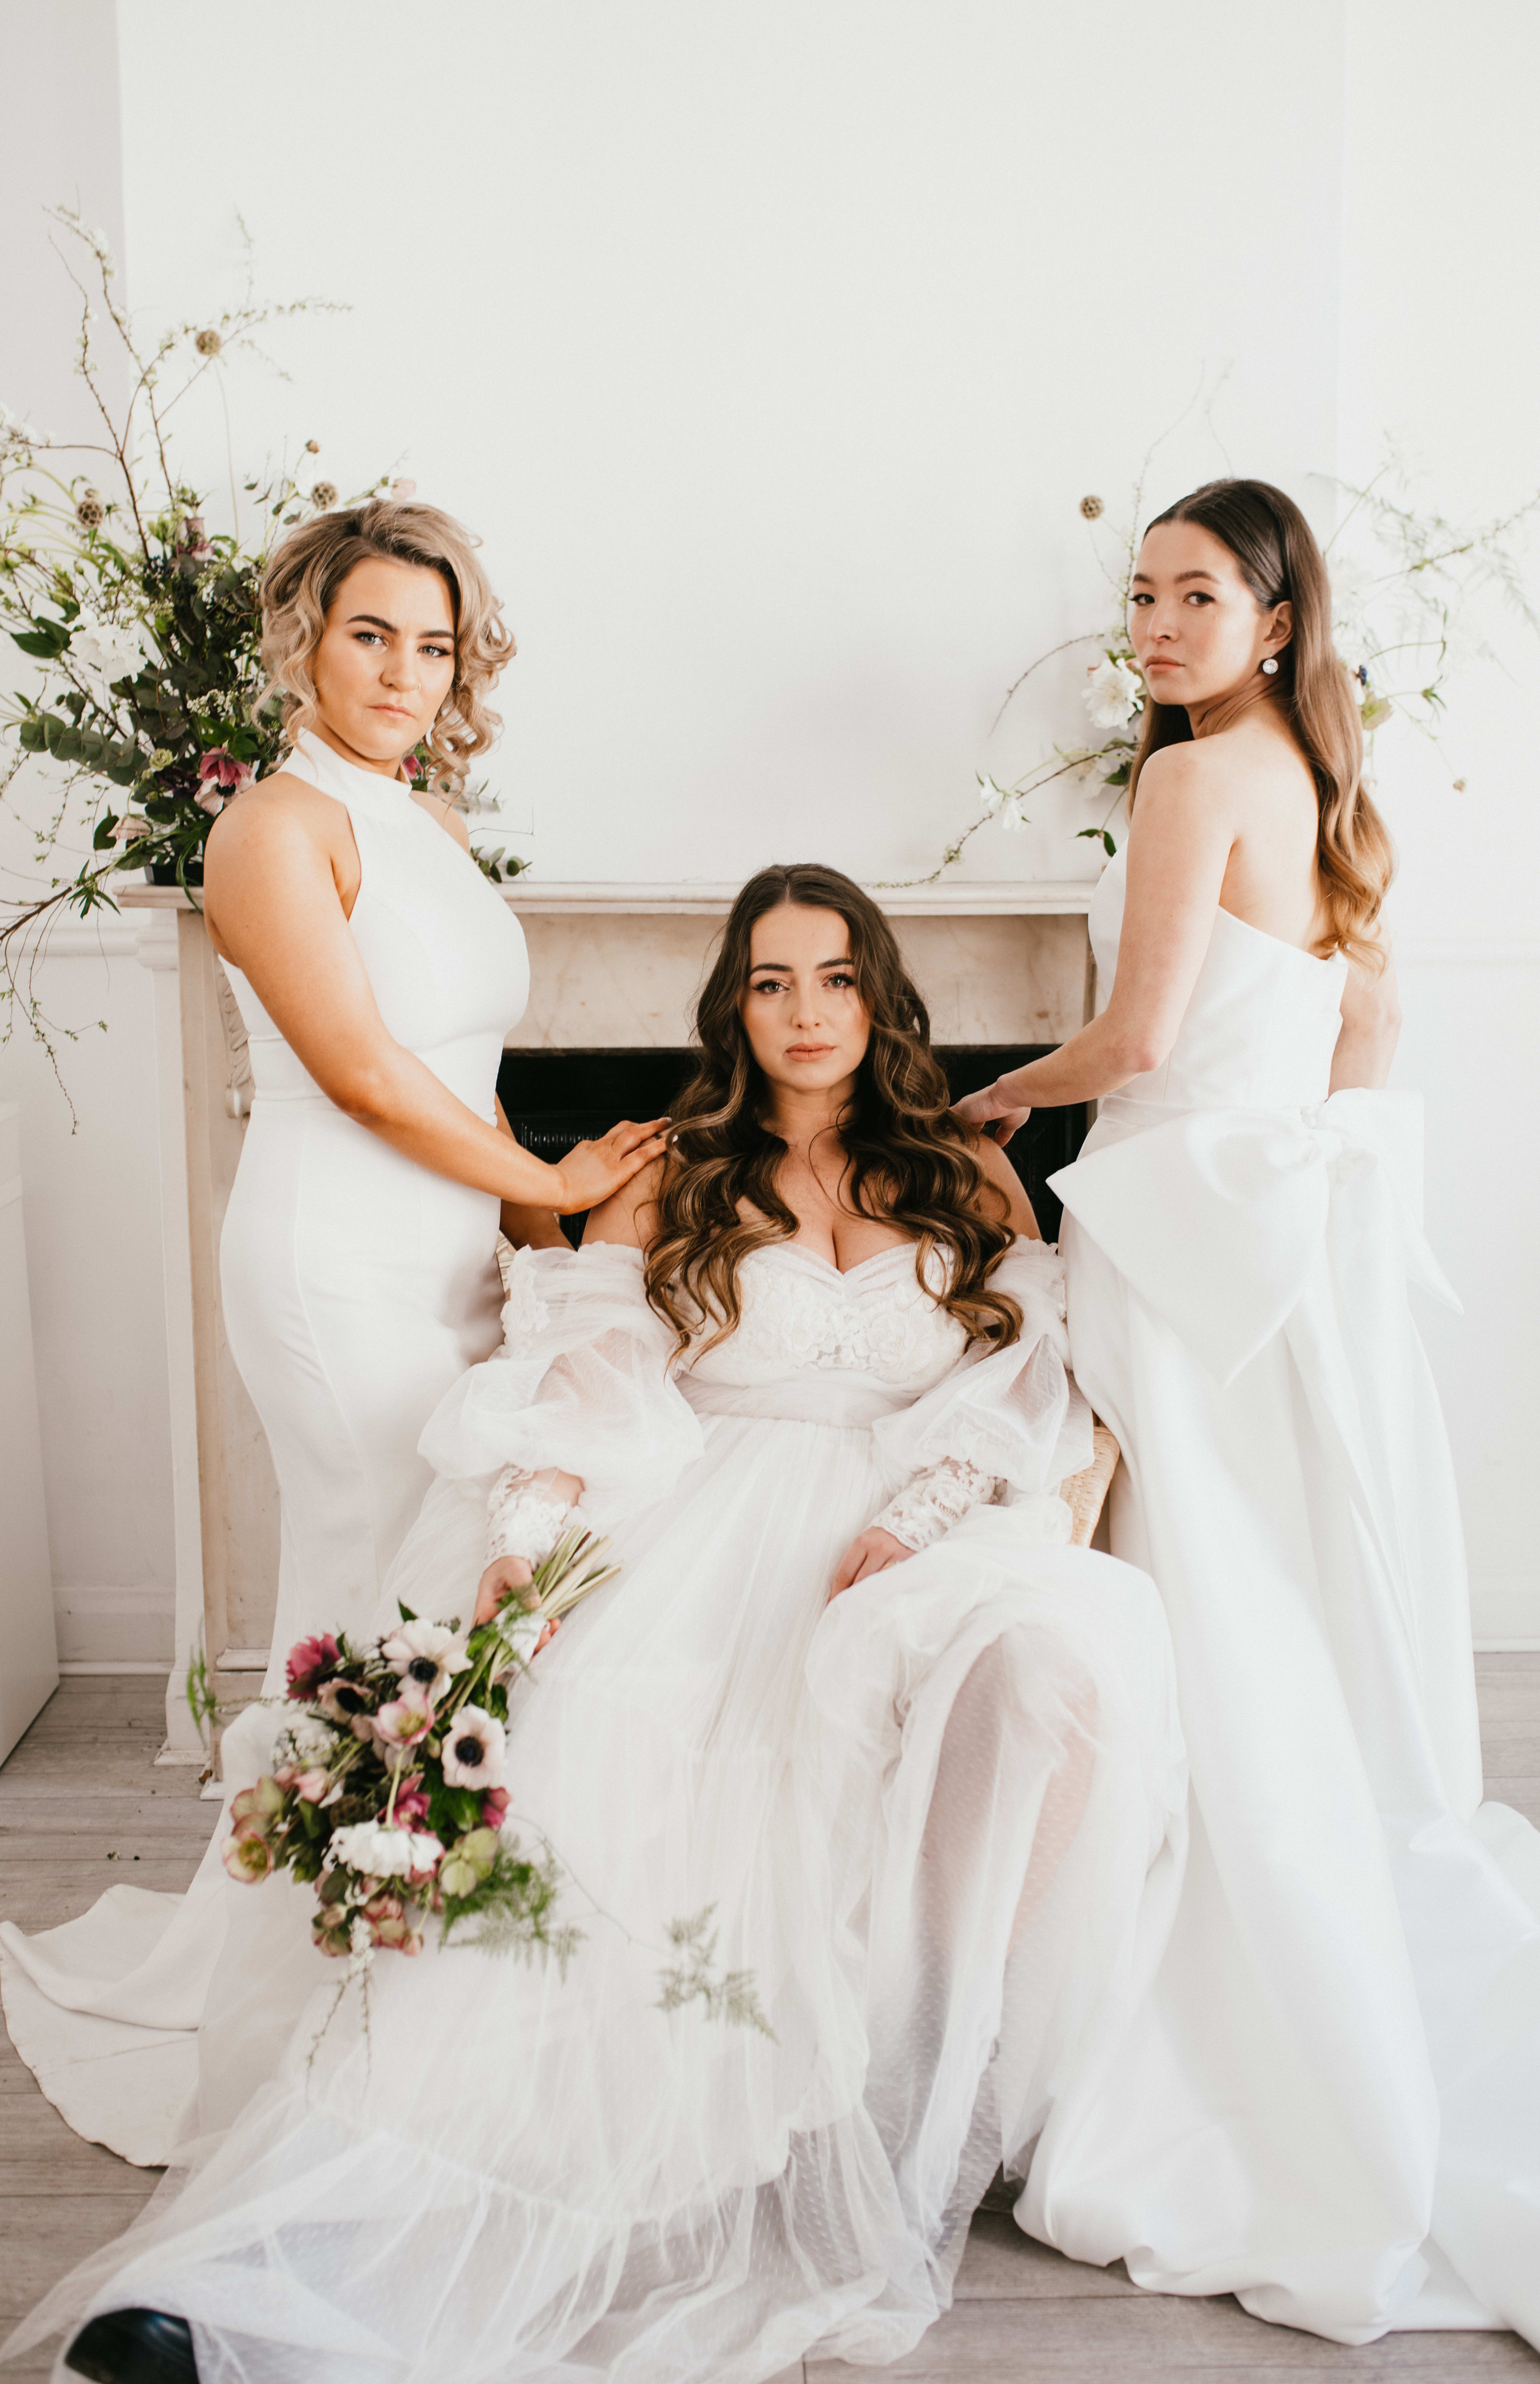 A bridal photo shoot with the bridesmaids set against a white fireplace surrounded by flowers.